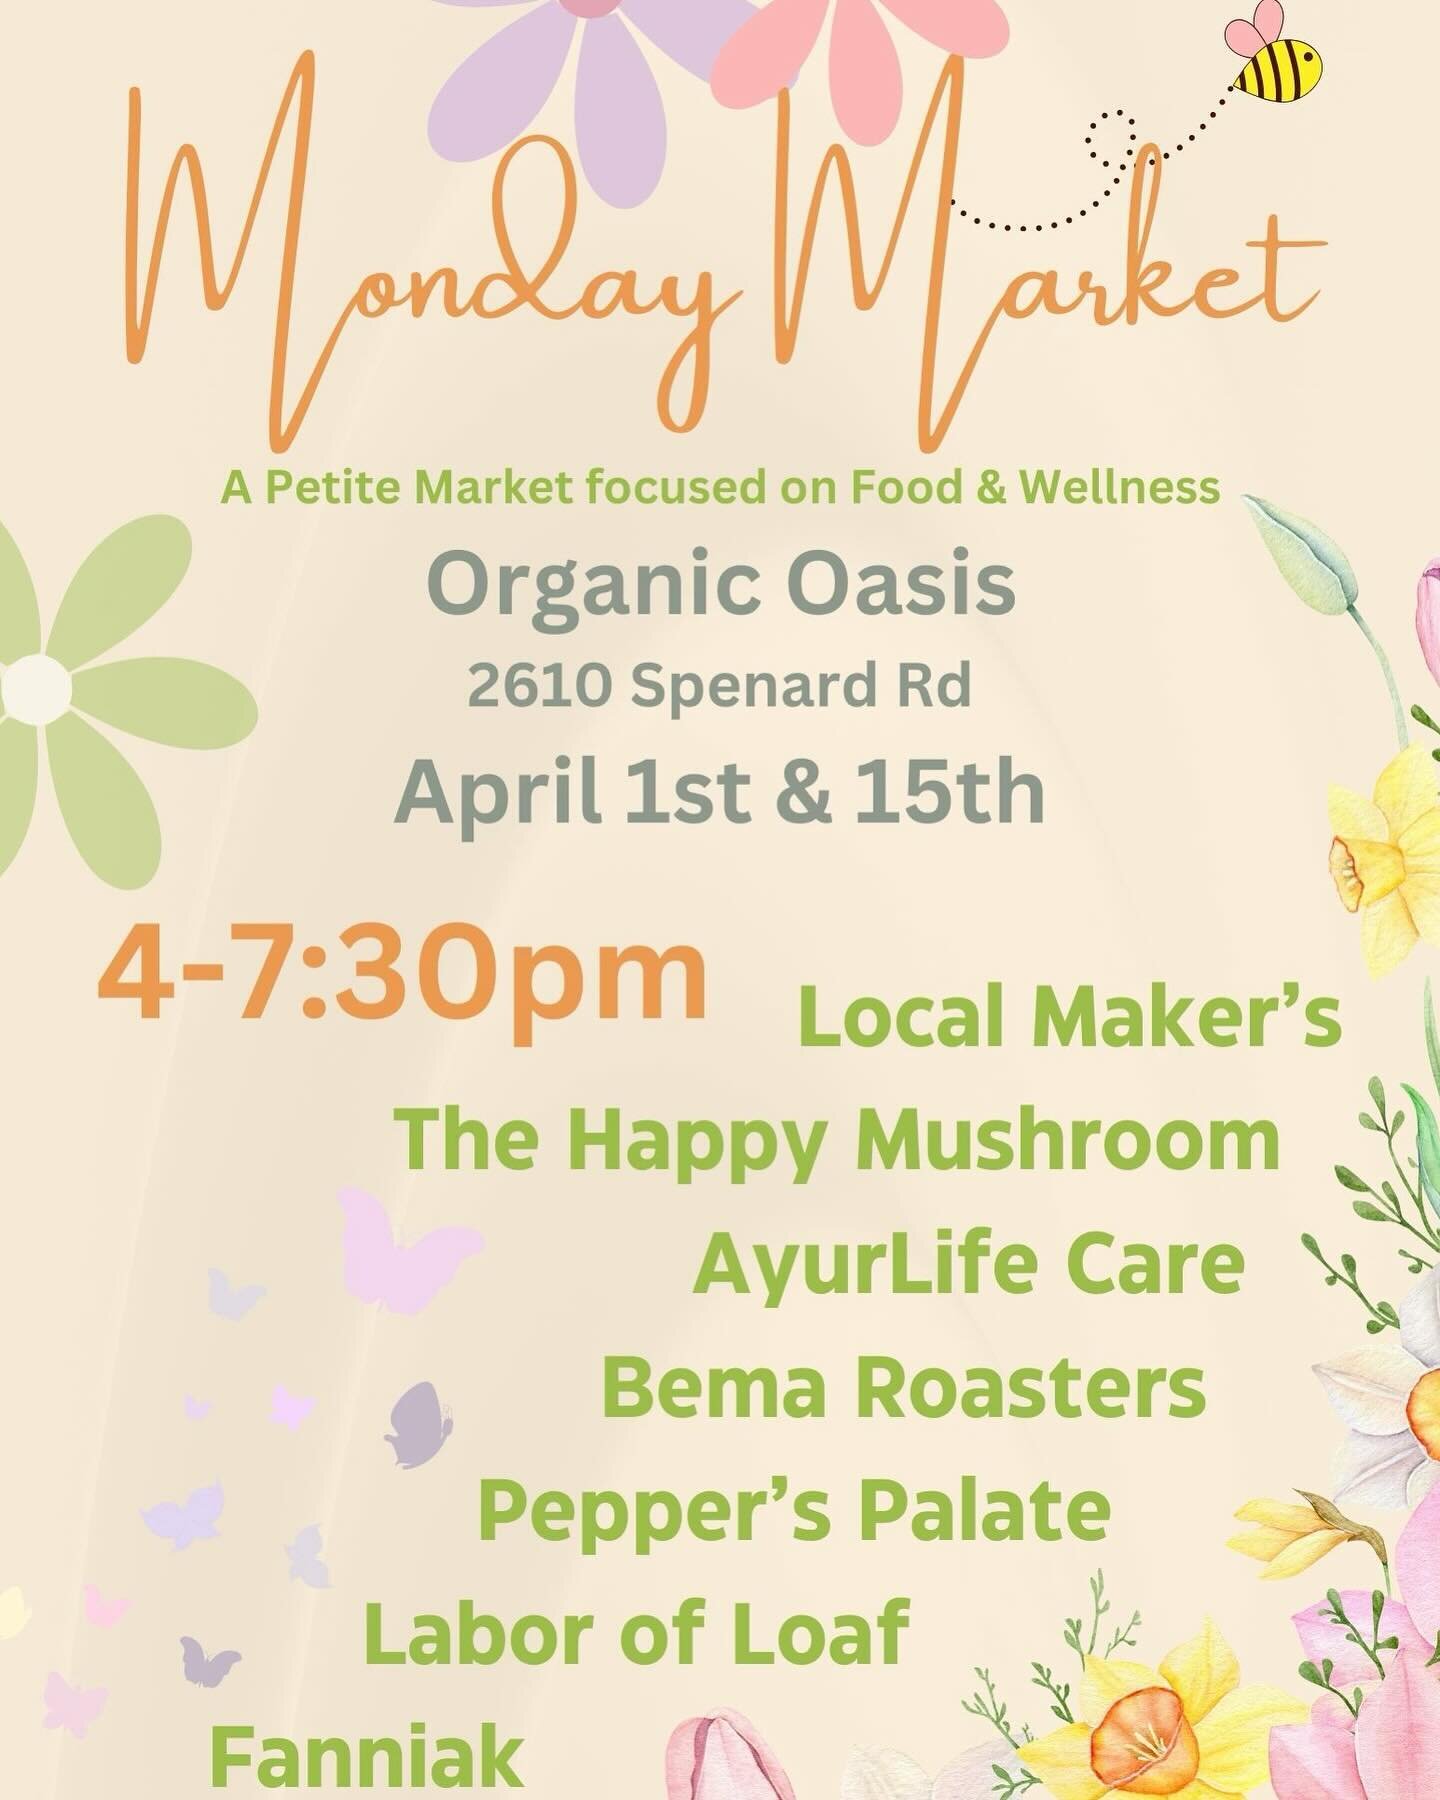 Join me at Organic Oasis again tomorrow for our Monday Market. 
Mushrooms, ferments, bread, cakes, teas and more!!!
4-7.30 with piano accompaniment from Erin Peznecker. 

@thehappymushroomak 
@fanniakbakery 
@peppers.palate 
@bemaroastersak 
@organic